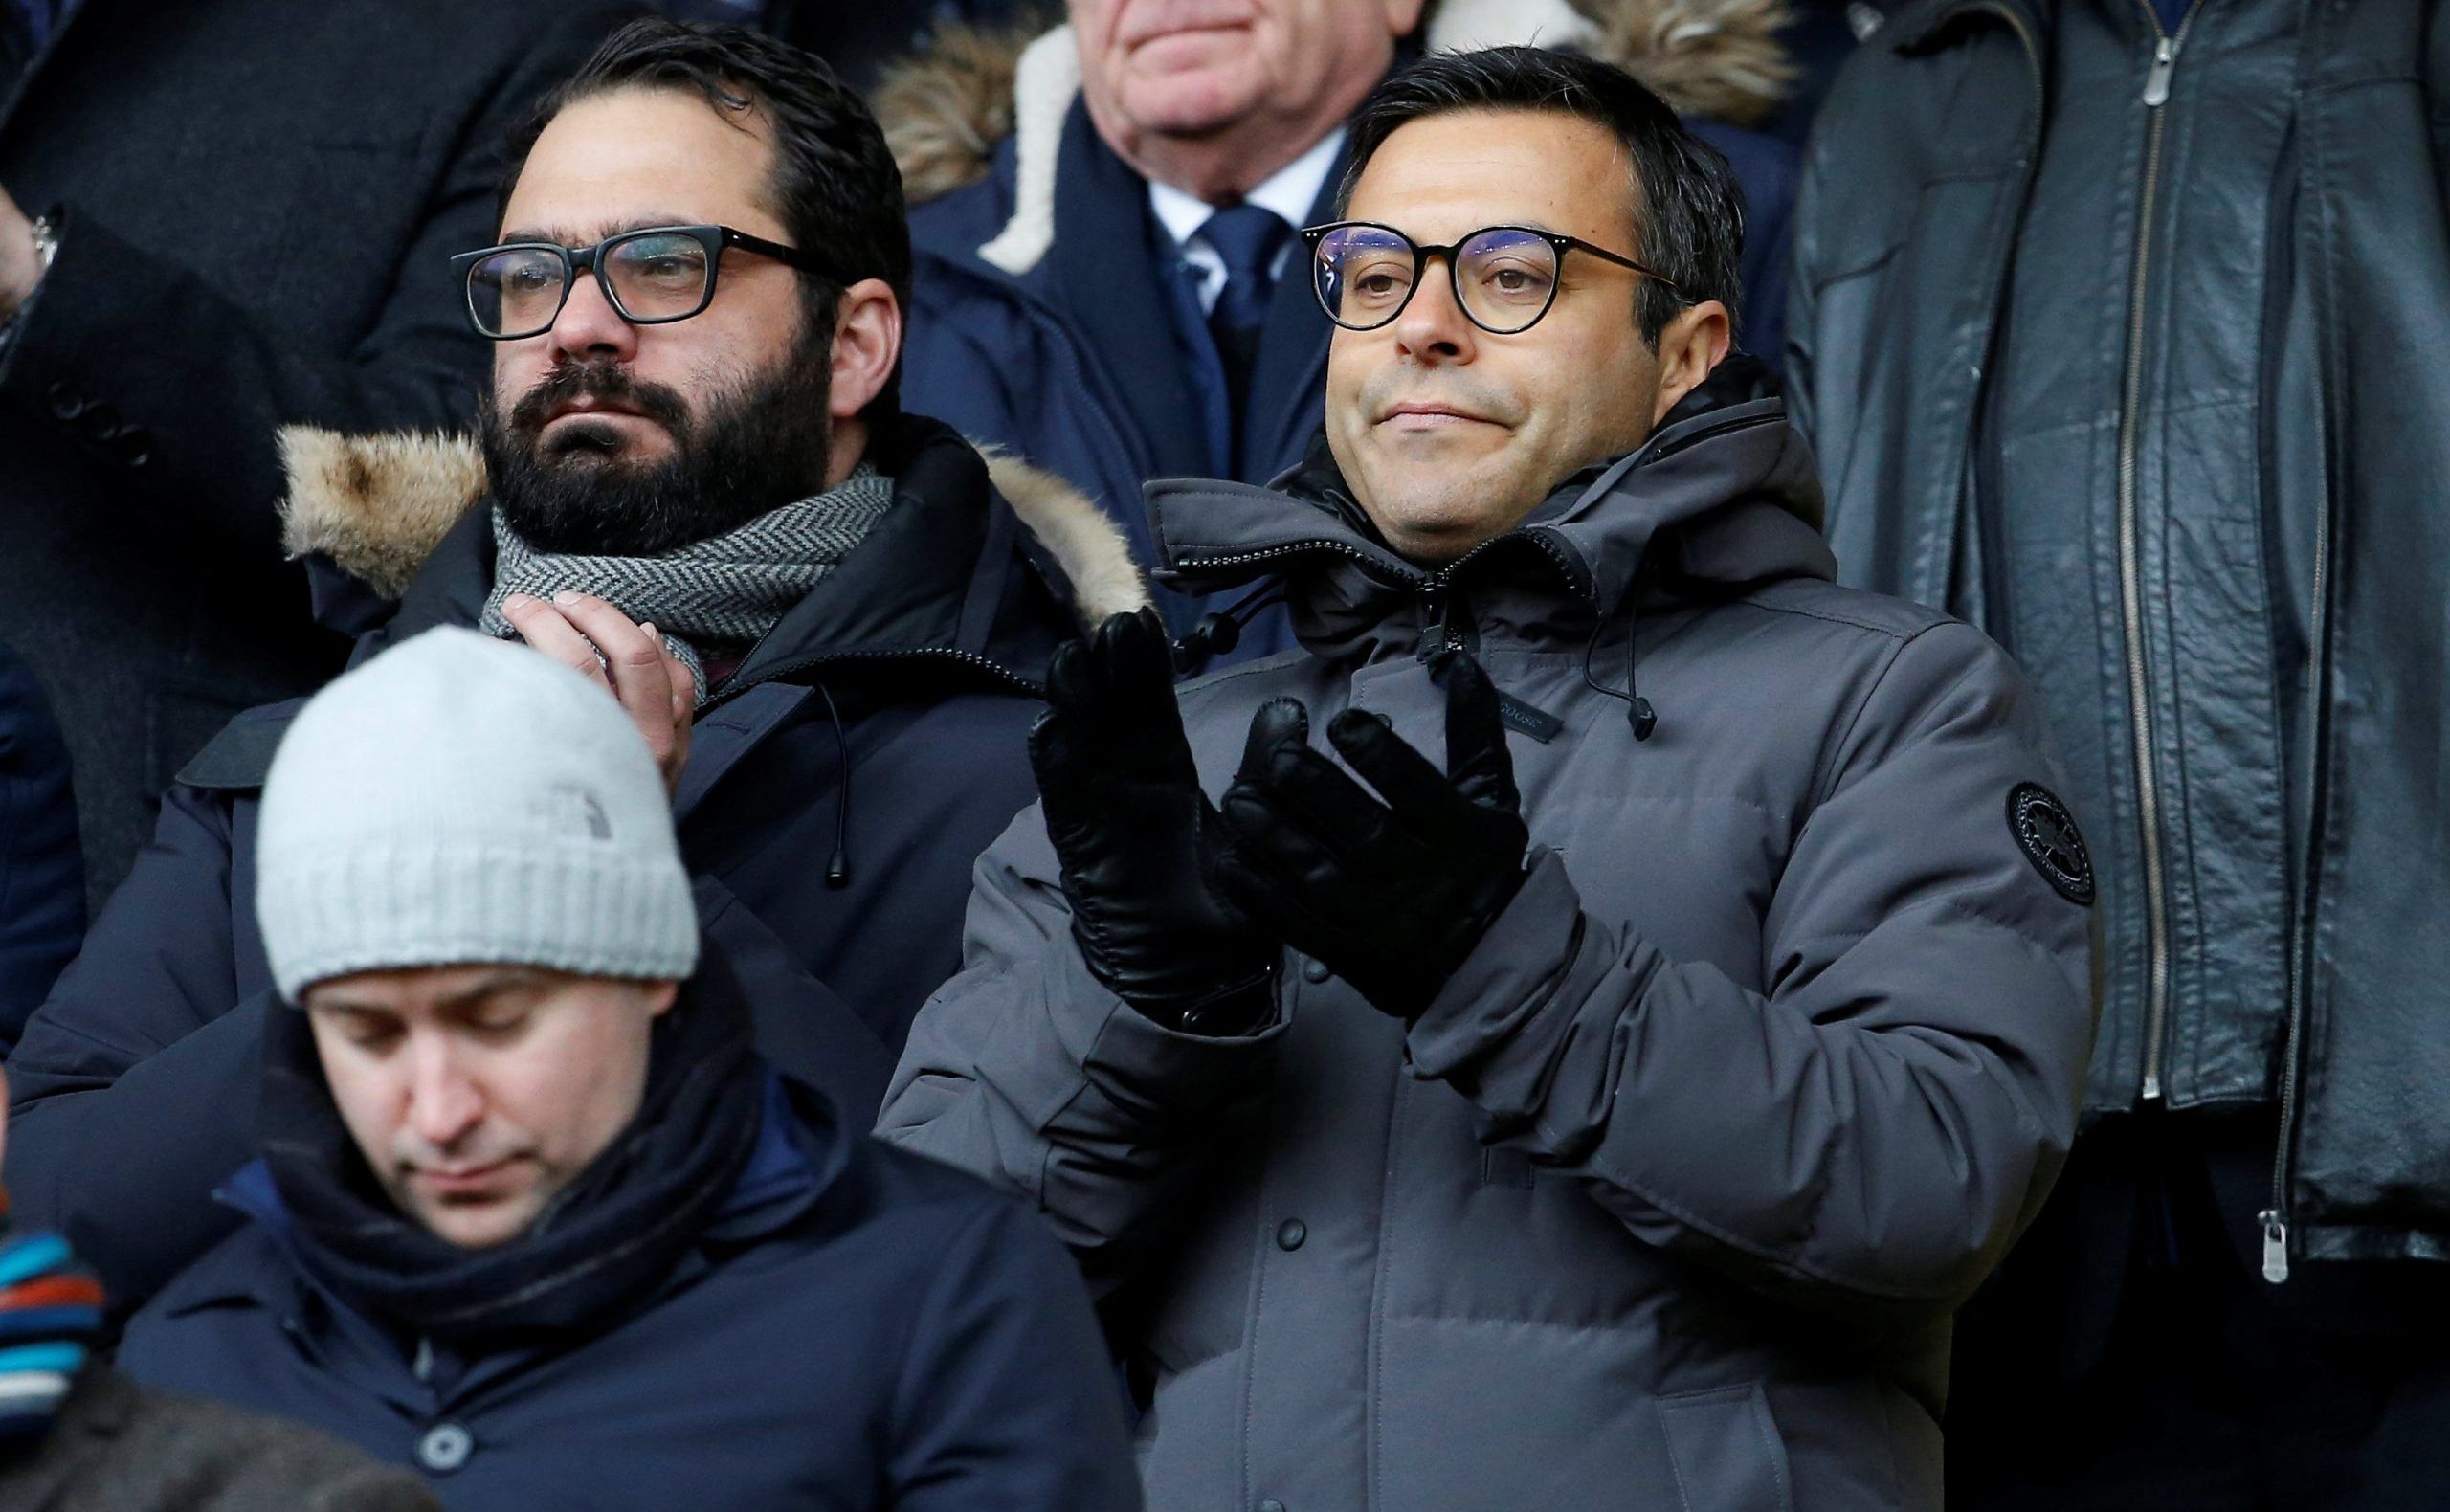 Soccer Football - Championship - Sheffield United vs Leeds United - Bramall Lane, Sheffield, Britain - February 10, 2018   Leeds United owner Andrea Radrizzani (R) watches from the stands   Action Images/Craig Brough    EDITORIAL USE ONLY. No use with unauthorized audio, video, data, fixture lists, club/league logos or 